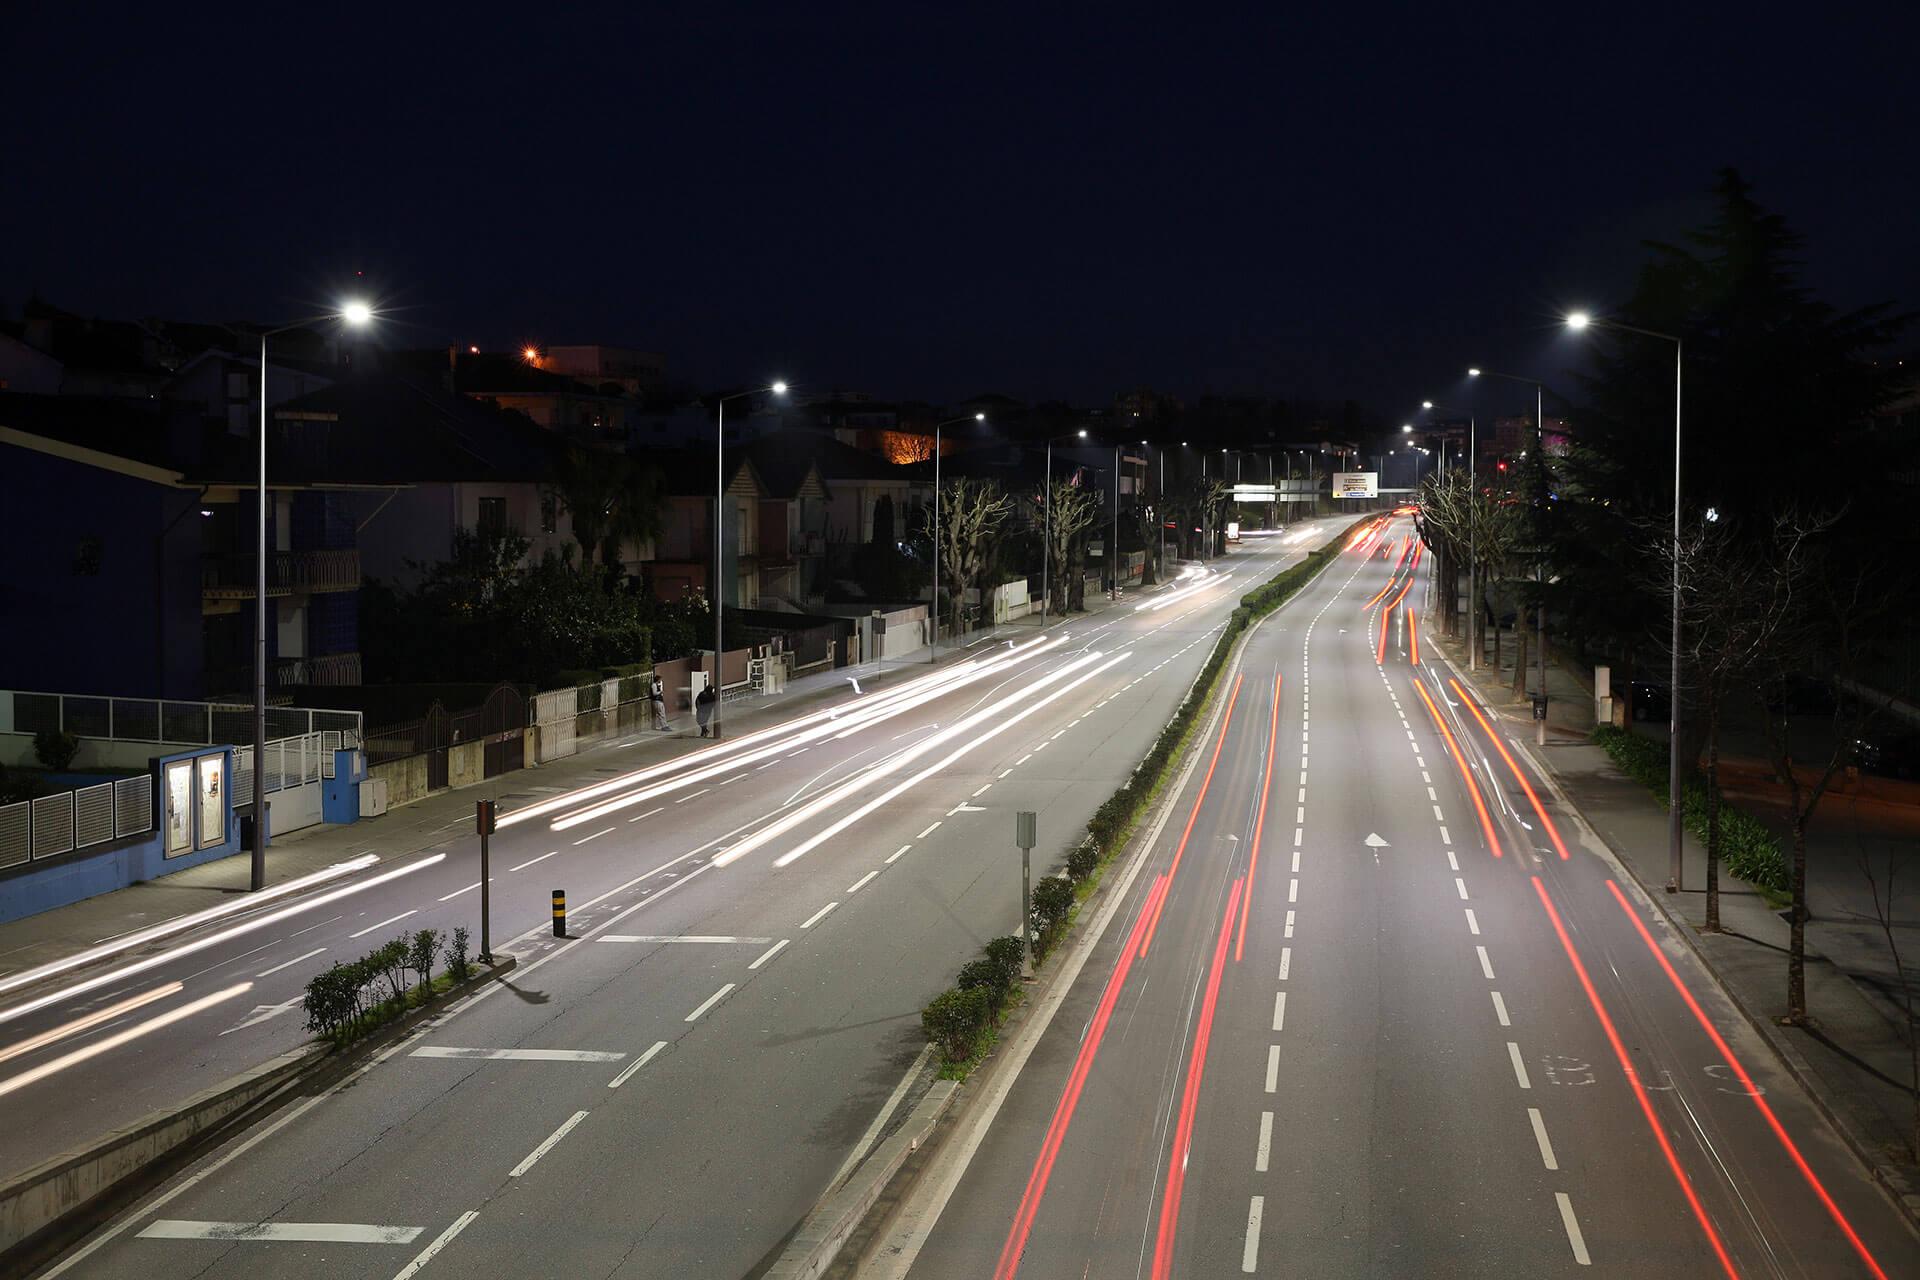 Nearly 4,000 Voltana outdoor LED luminaires light the town of Braga to improve safety and reduce energy costs